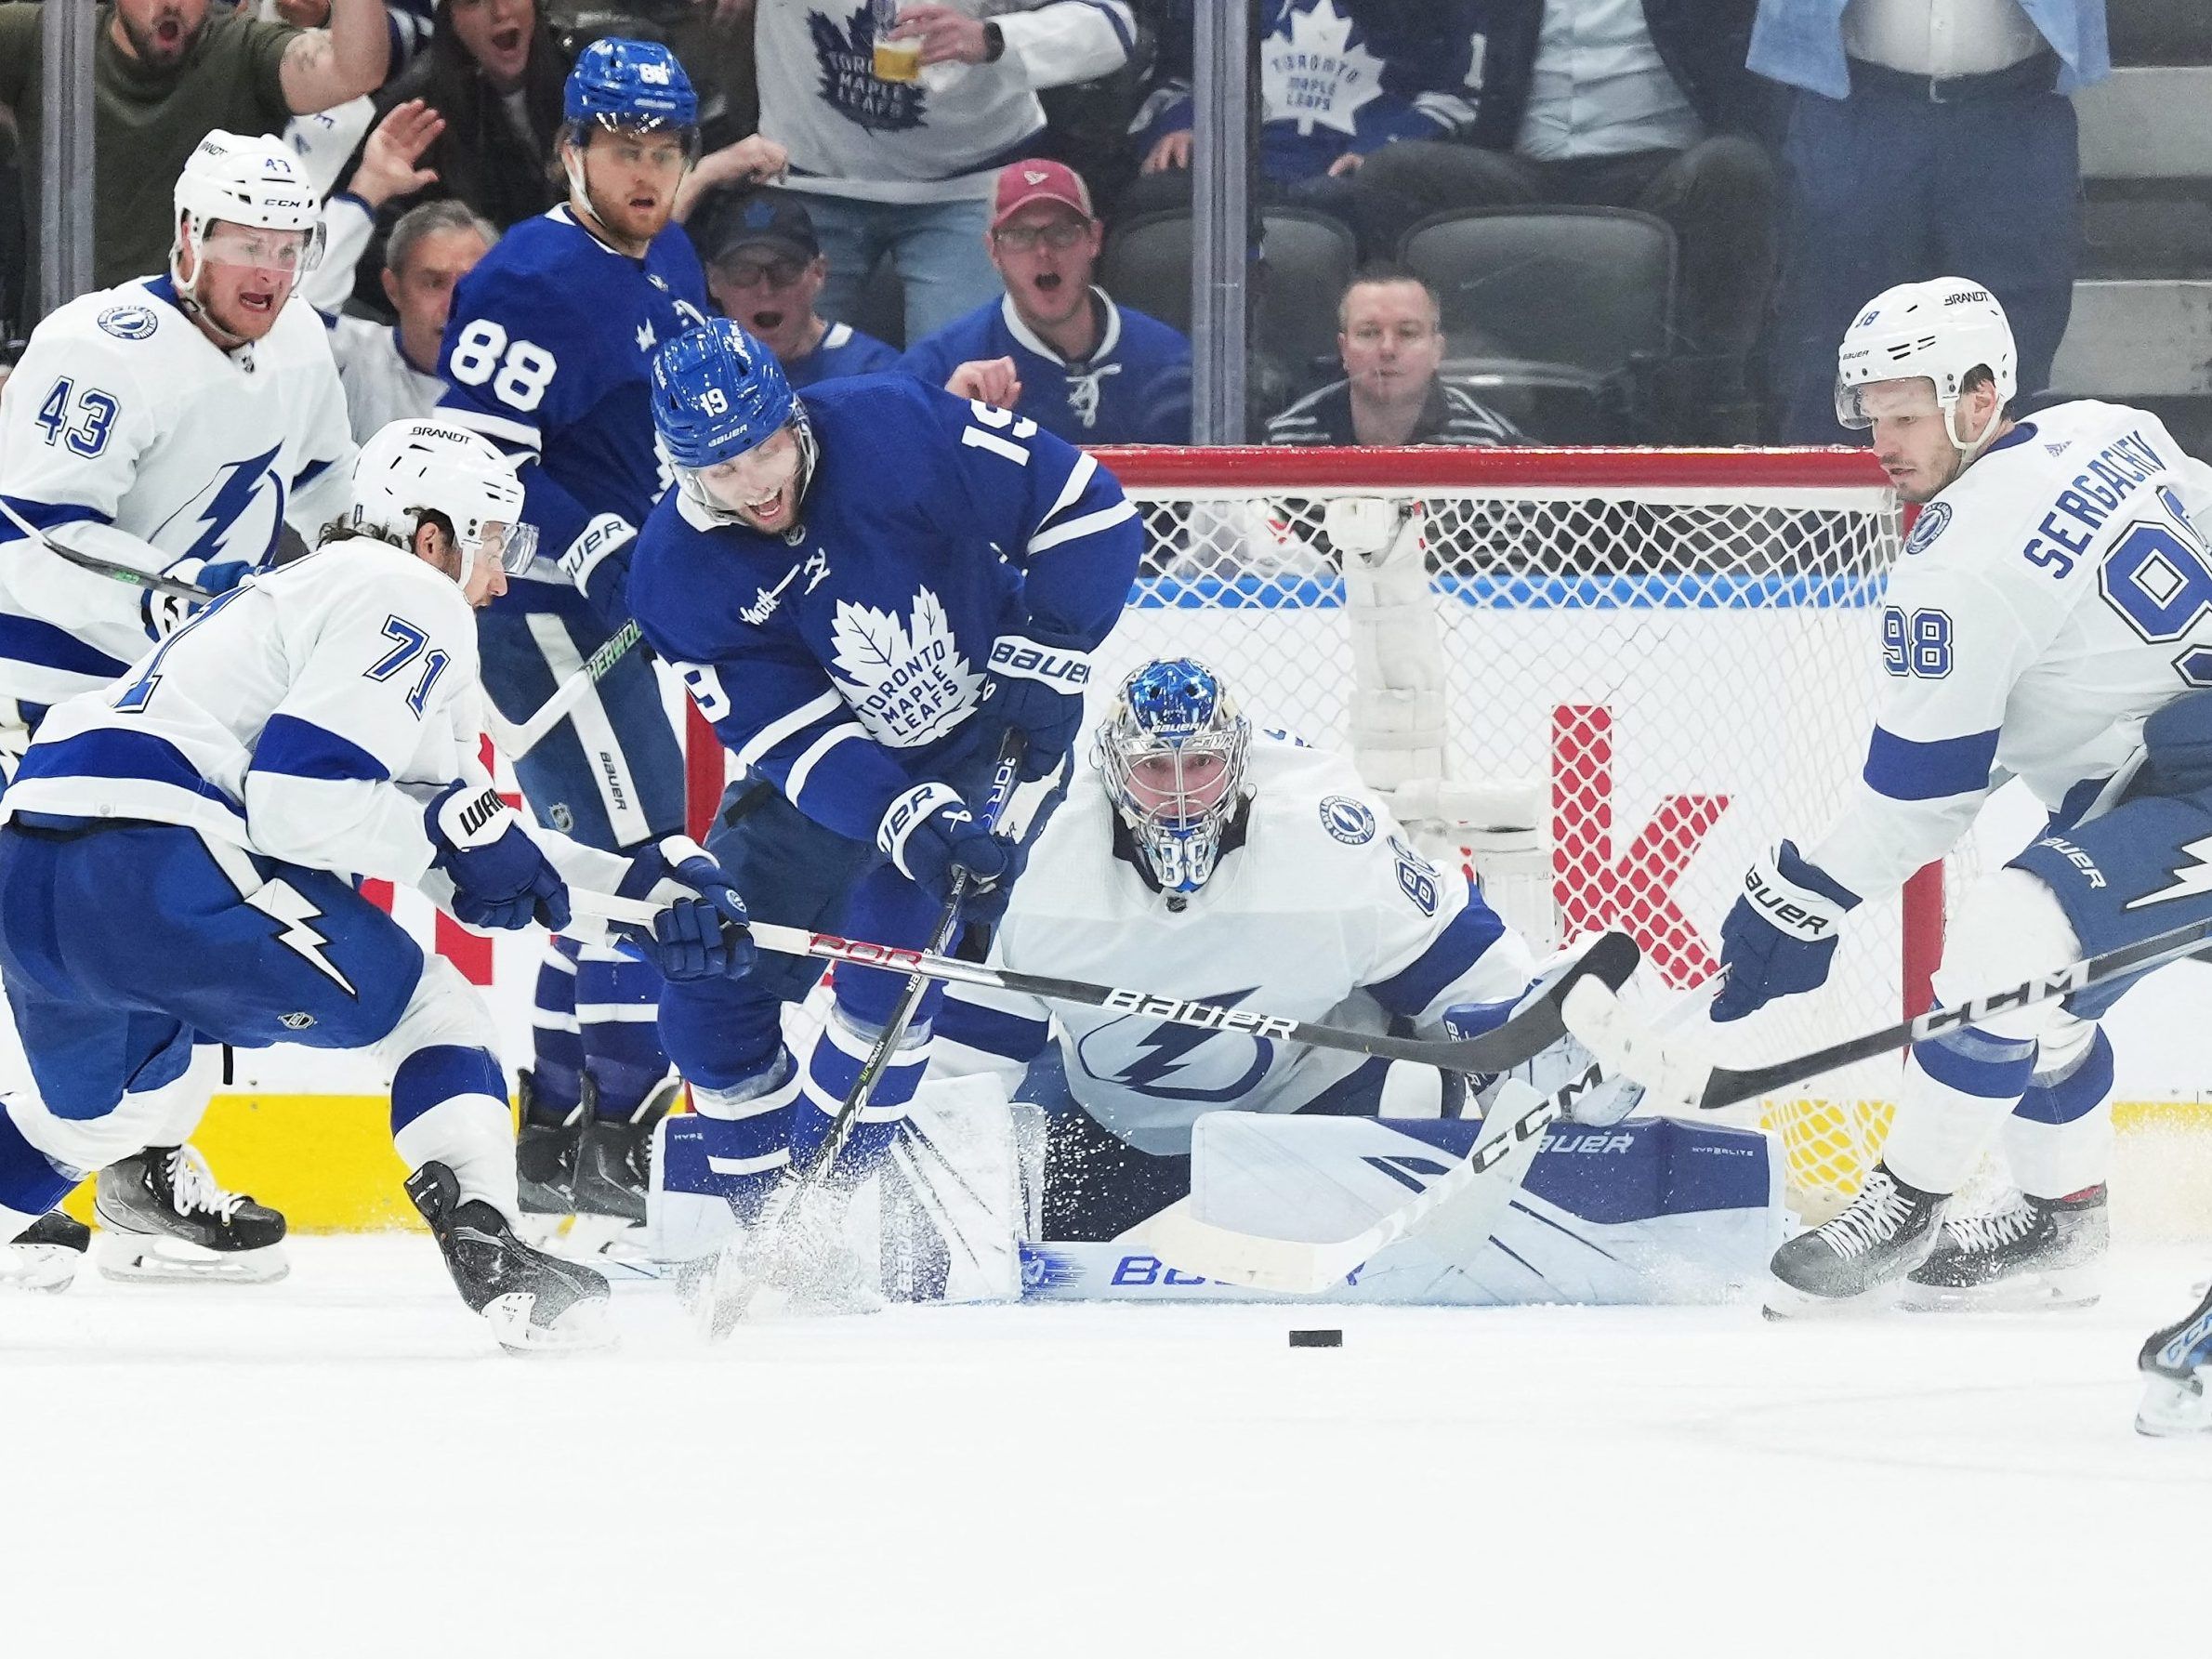 John Tavares, Mitch Marner lead Toronto rout of Flyers – Daily Local